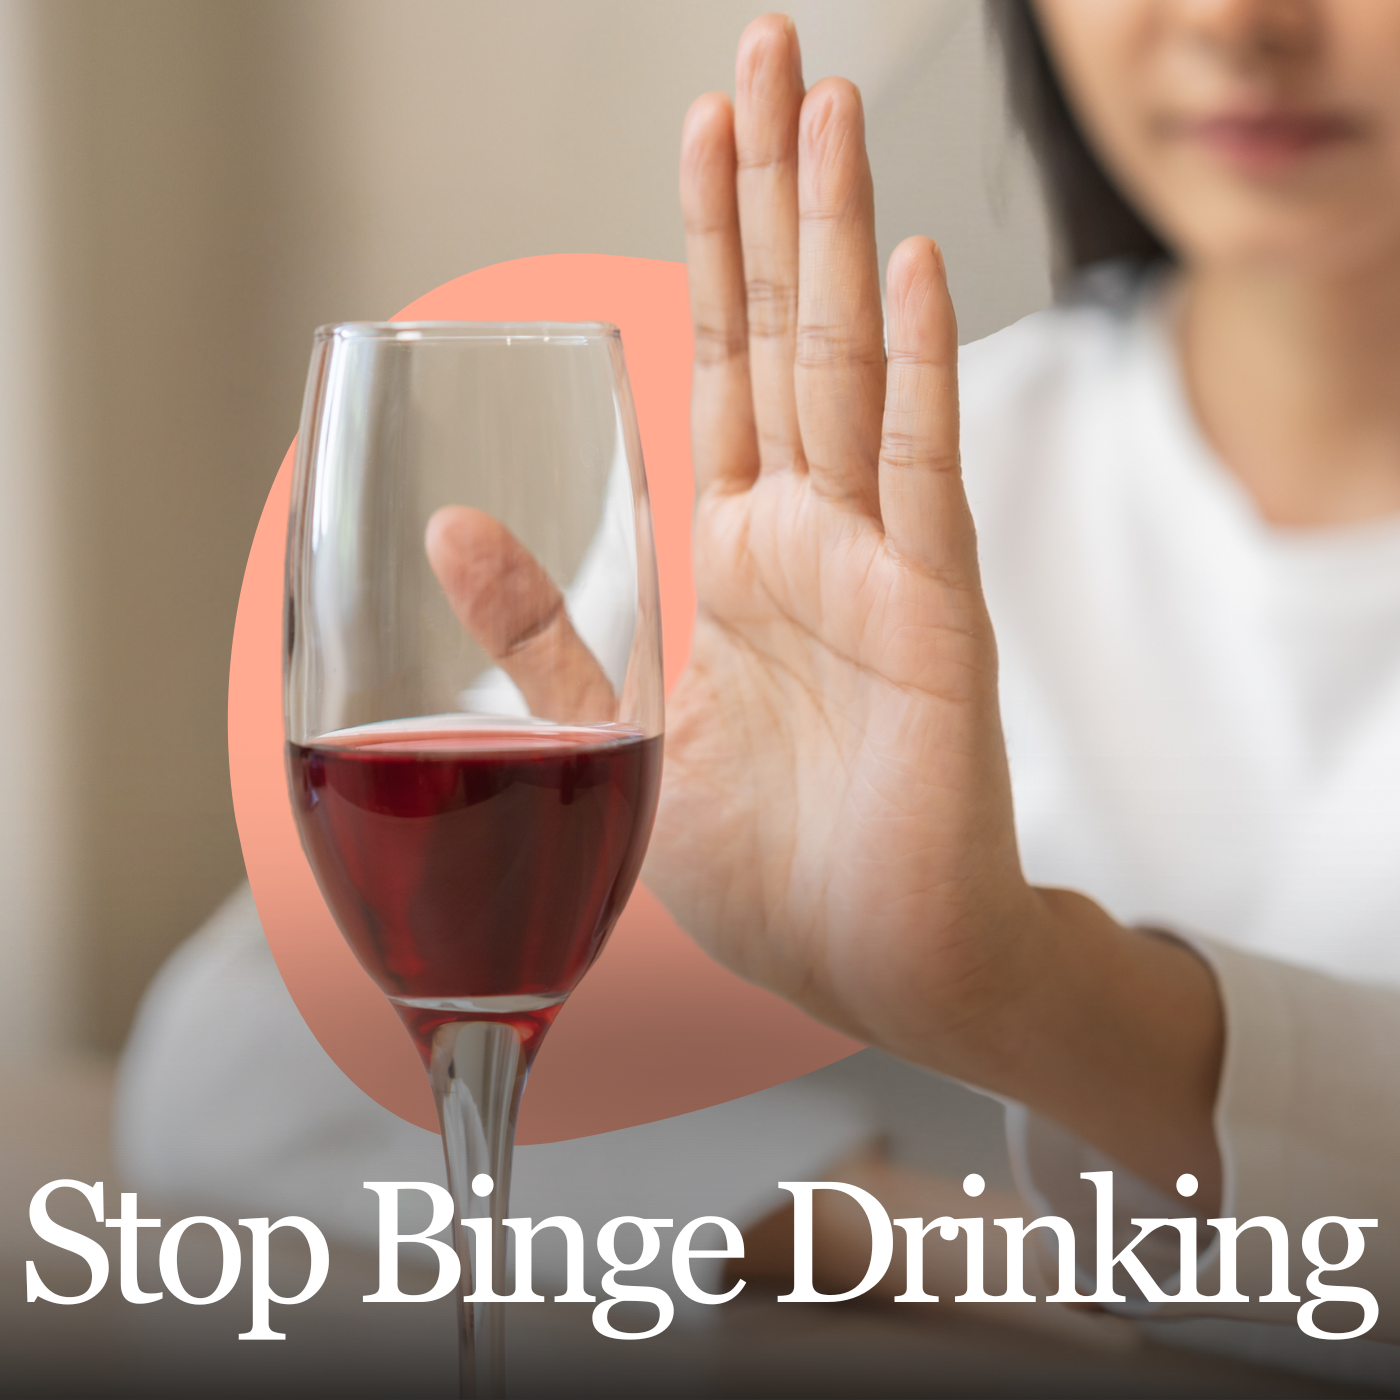 Stop Binge Drinking Hypnotherapy - take a break from alcohol & watch your life change